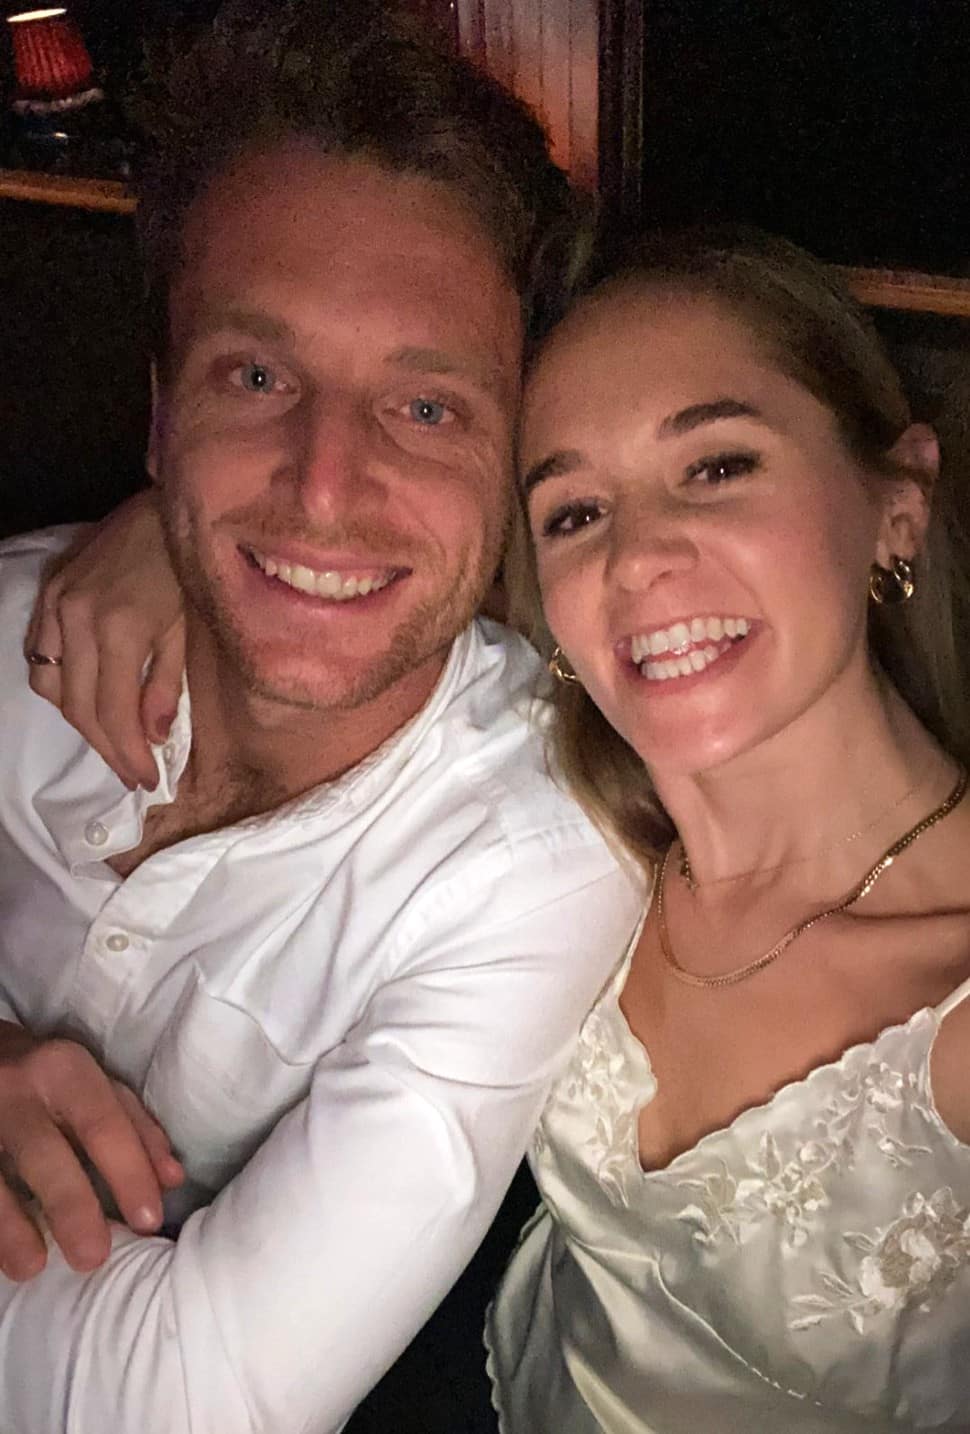 Louise Buttler is pilates/fitness instructor, who often films sessions and put them on social media and YouTube. Husband Jos Buttler has joined in some sessions as well. (Source: Twitter)